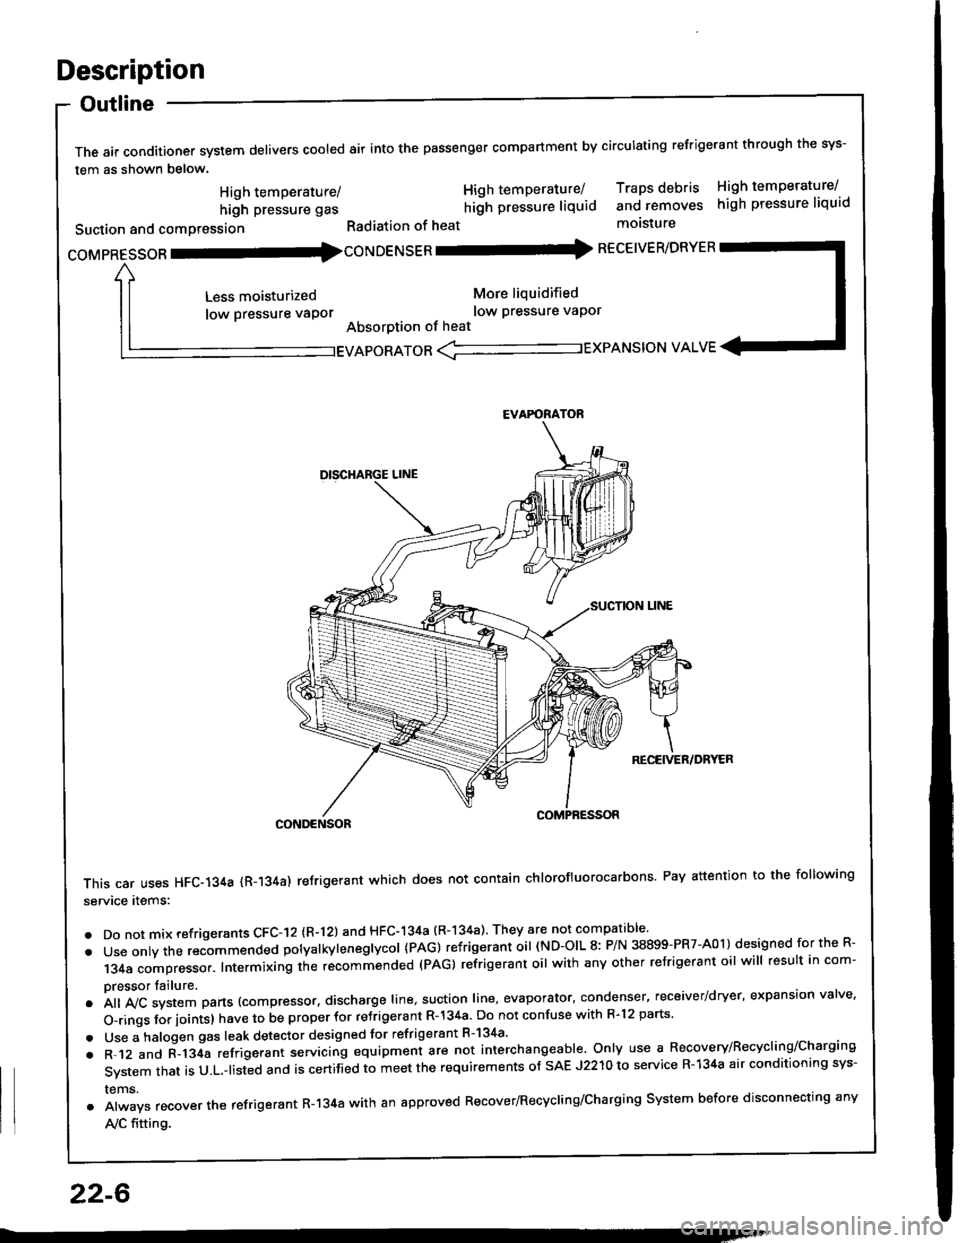 HONDA INTEGRA 1994 4.G Owners Guide Description
Outline
The air conditioner system delivers cooled air into the passenger compartment by circulating refrigerant through the sys-
tem as shown below.
CONDENSOR
This car uses HFC-134a {R-13